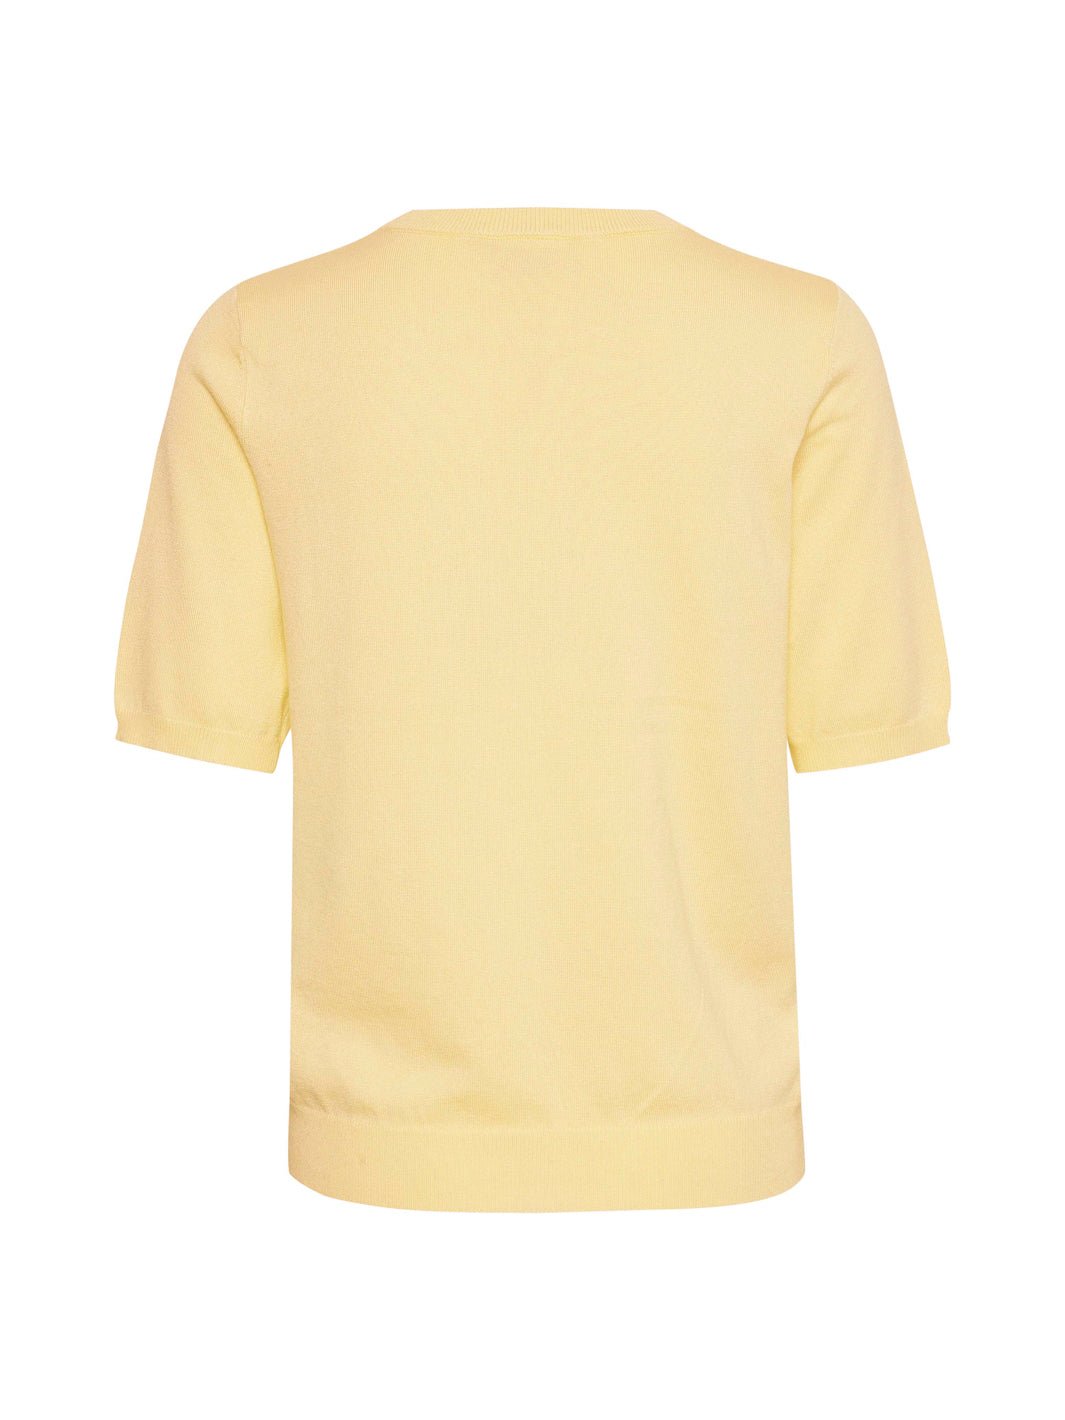 Kaffe KAlizza o-neck pullover mellow yellow - Online-Mode